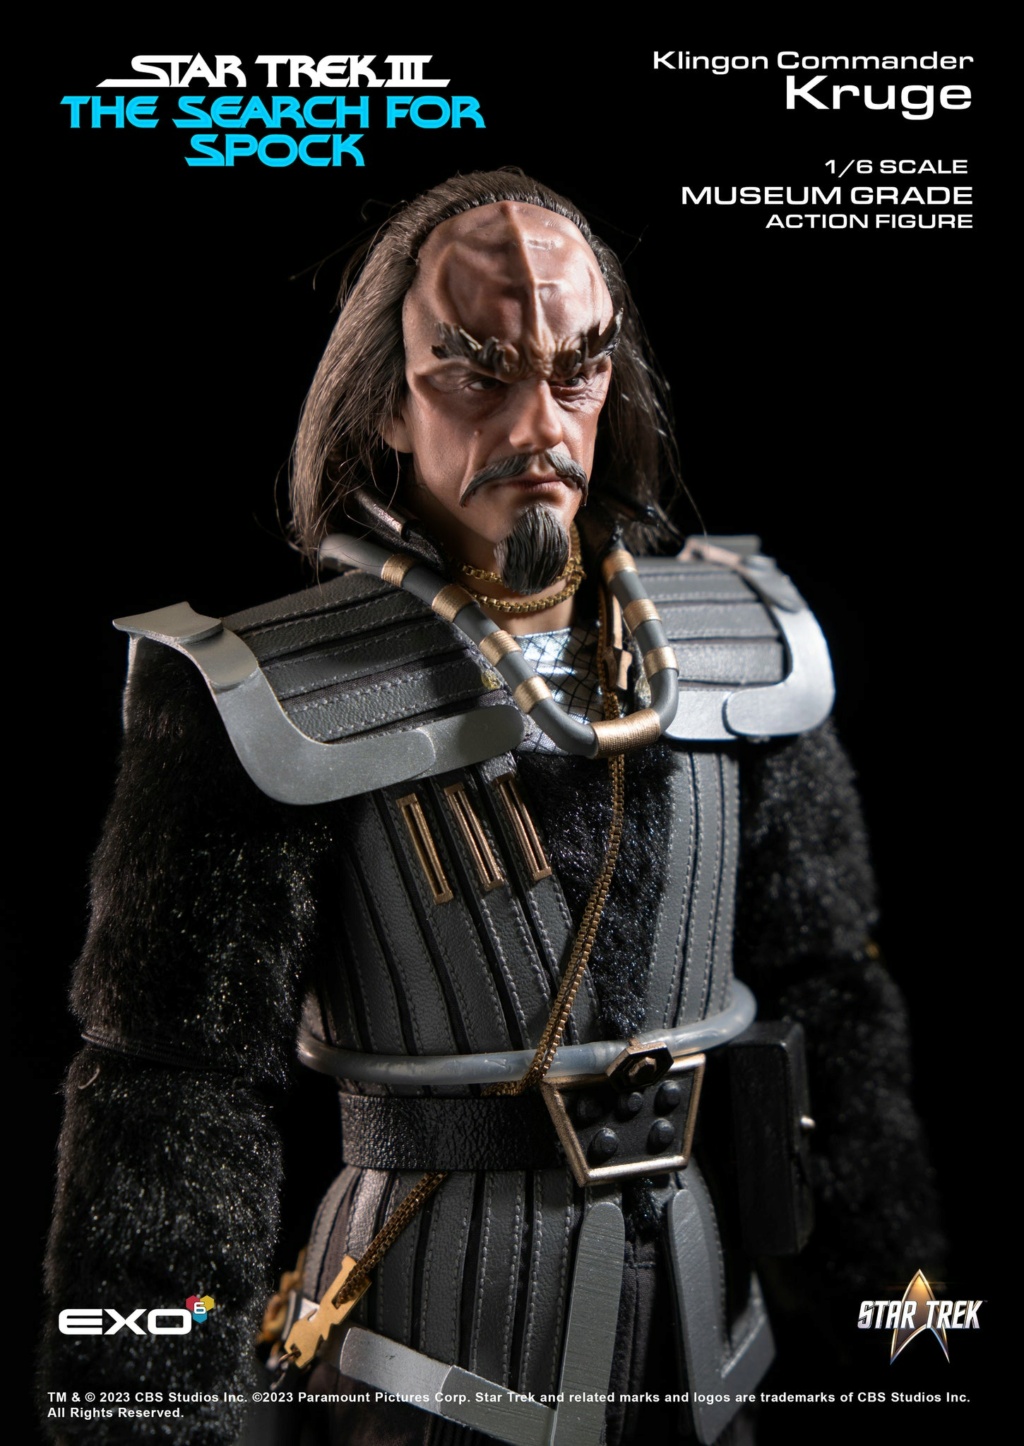 TheSearchForSpock - NEW PRODUCT: EXO-6: Star Trek III: The Search For Spock: Klingon Commander Kruge 1/6 scale action figure 1463